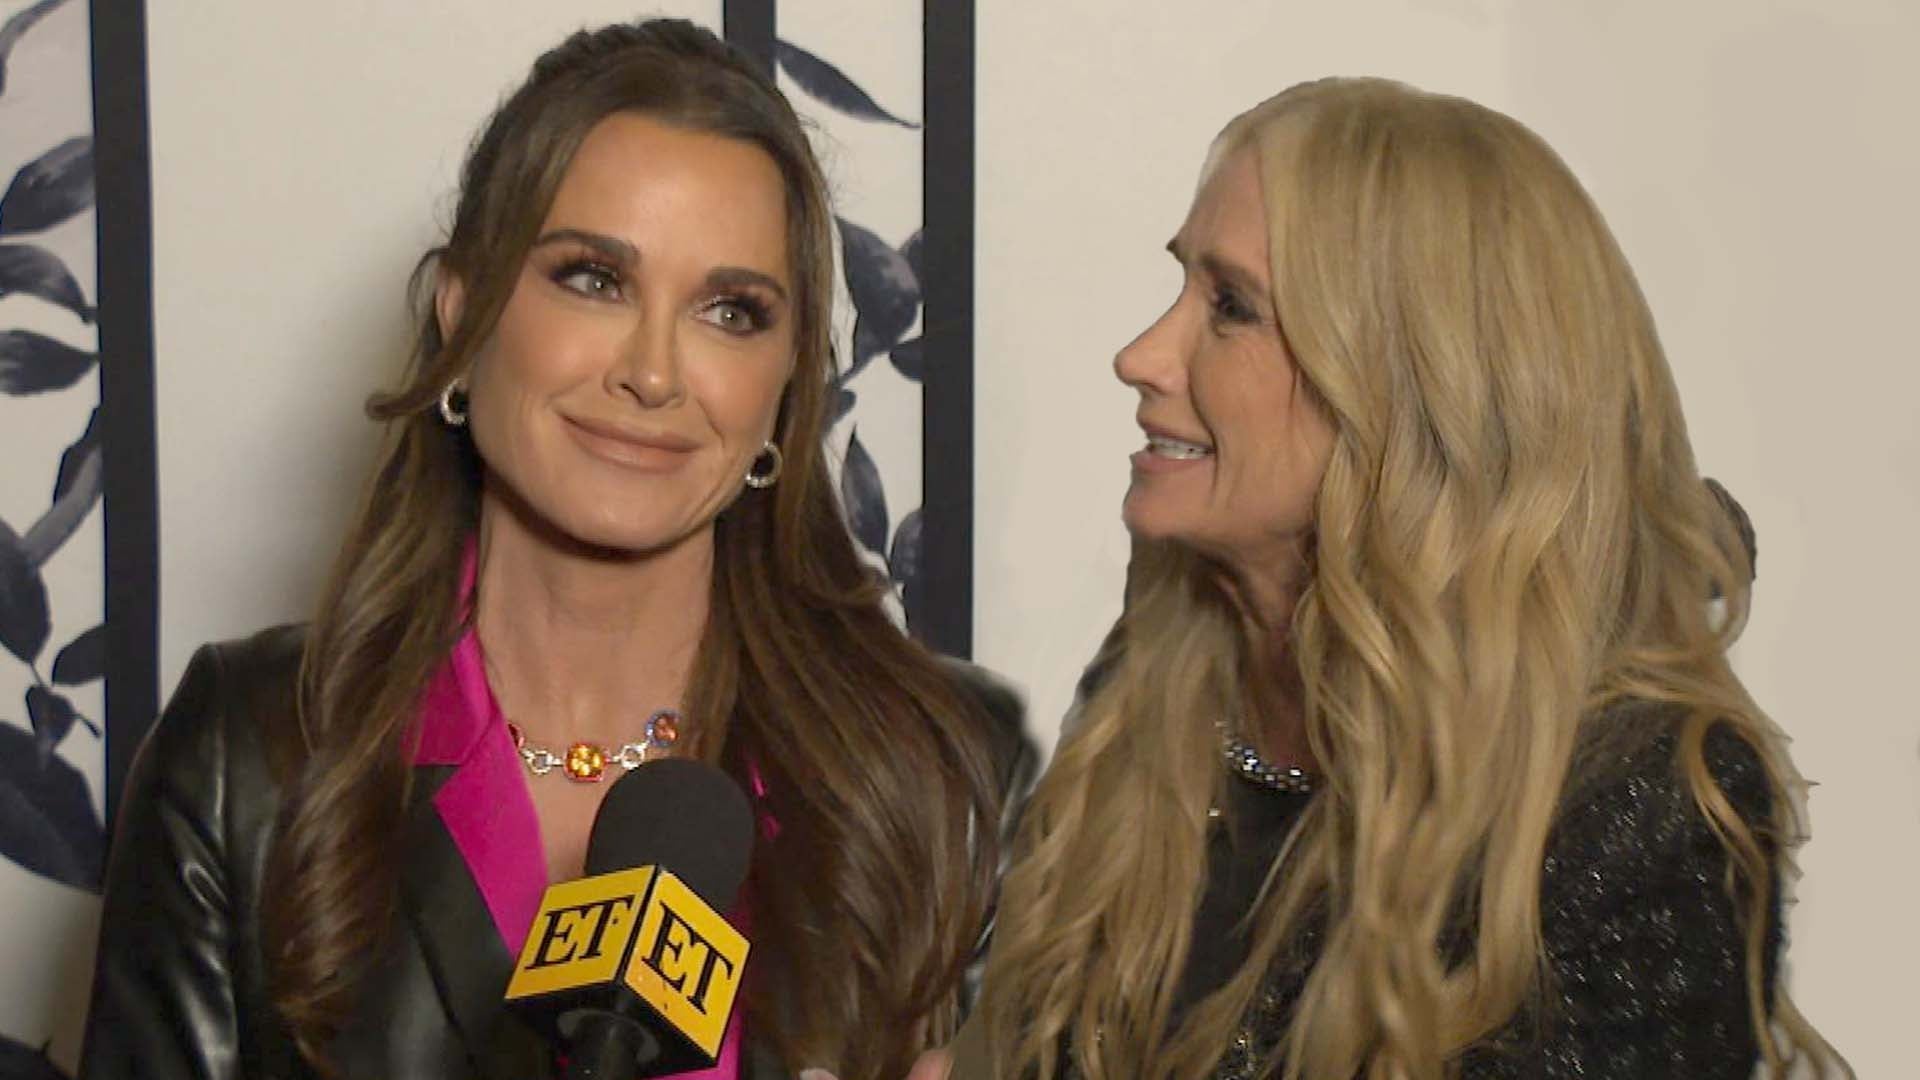 Kim Richards Explains Return to ‘RHOBH’ With Sister Kyle Richards (Exclusive)